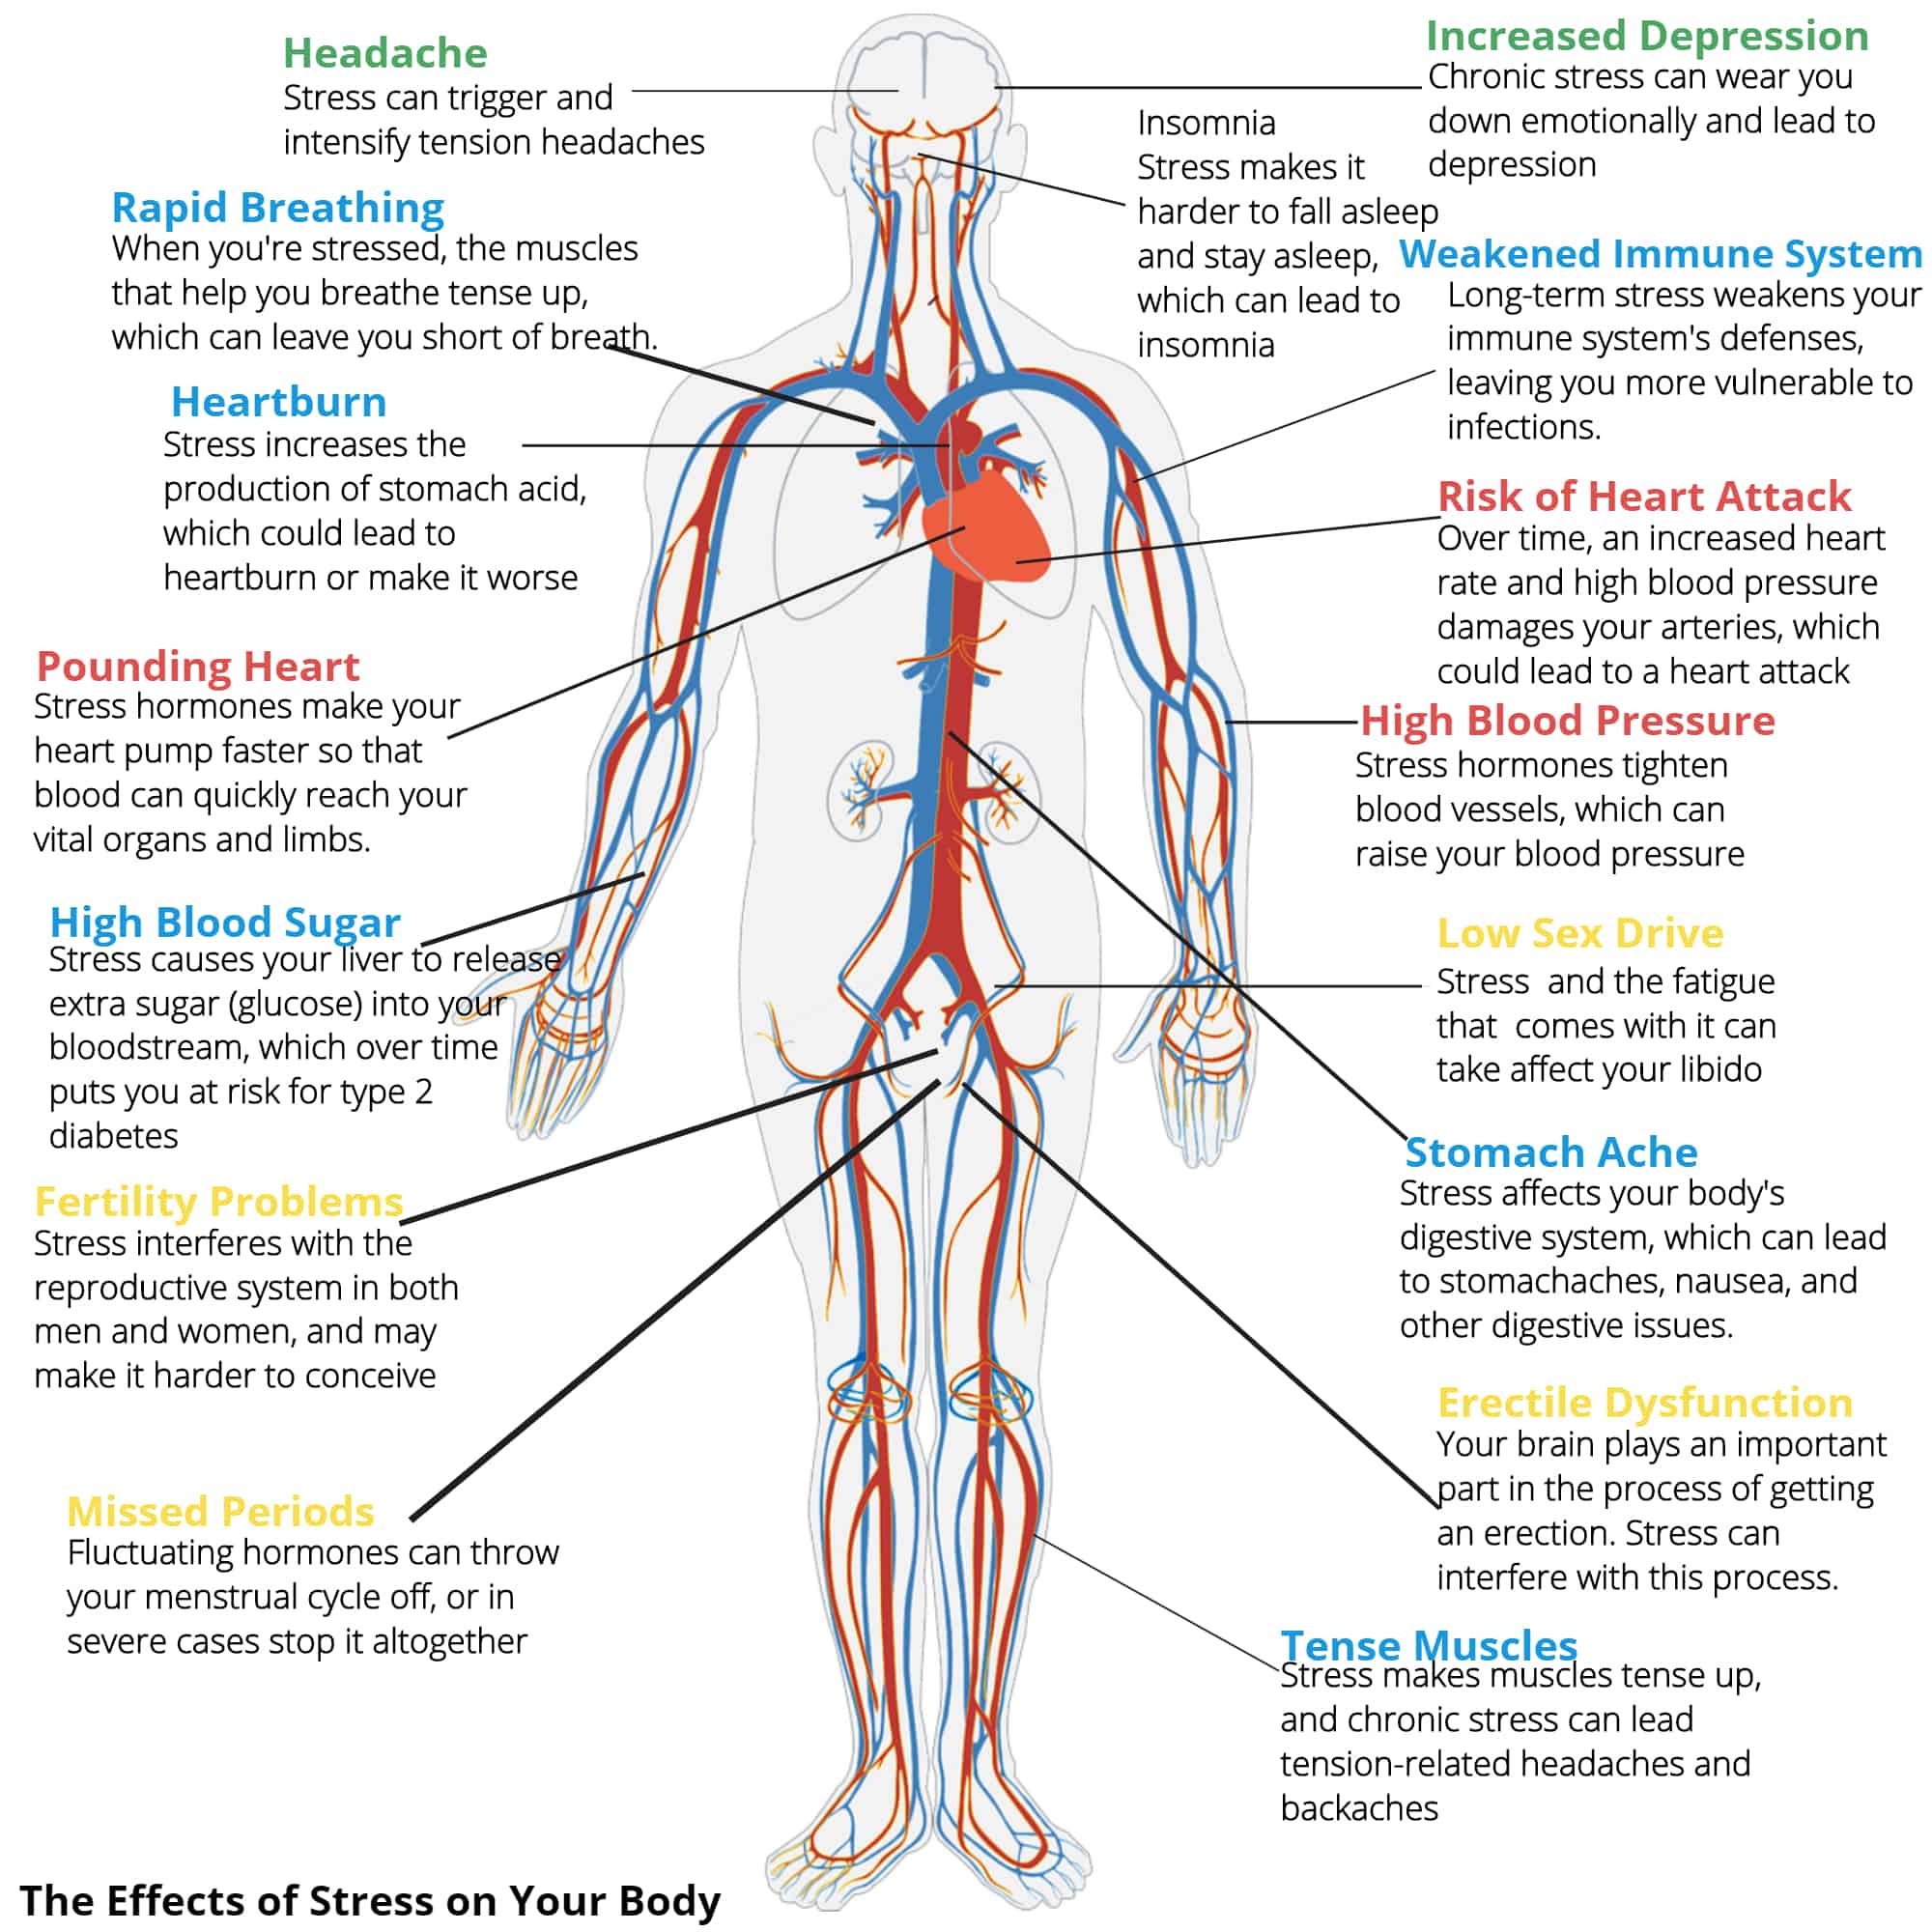 The Effects of Stress to your Body